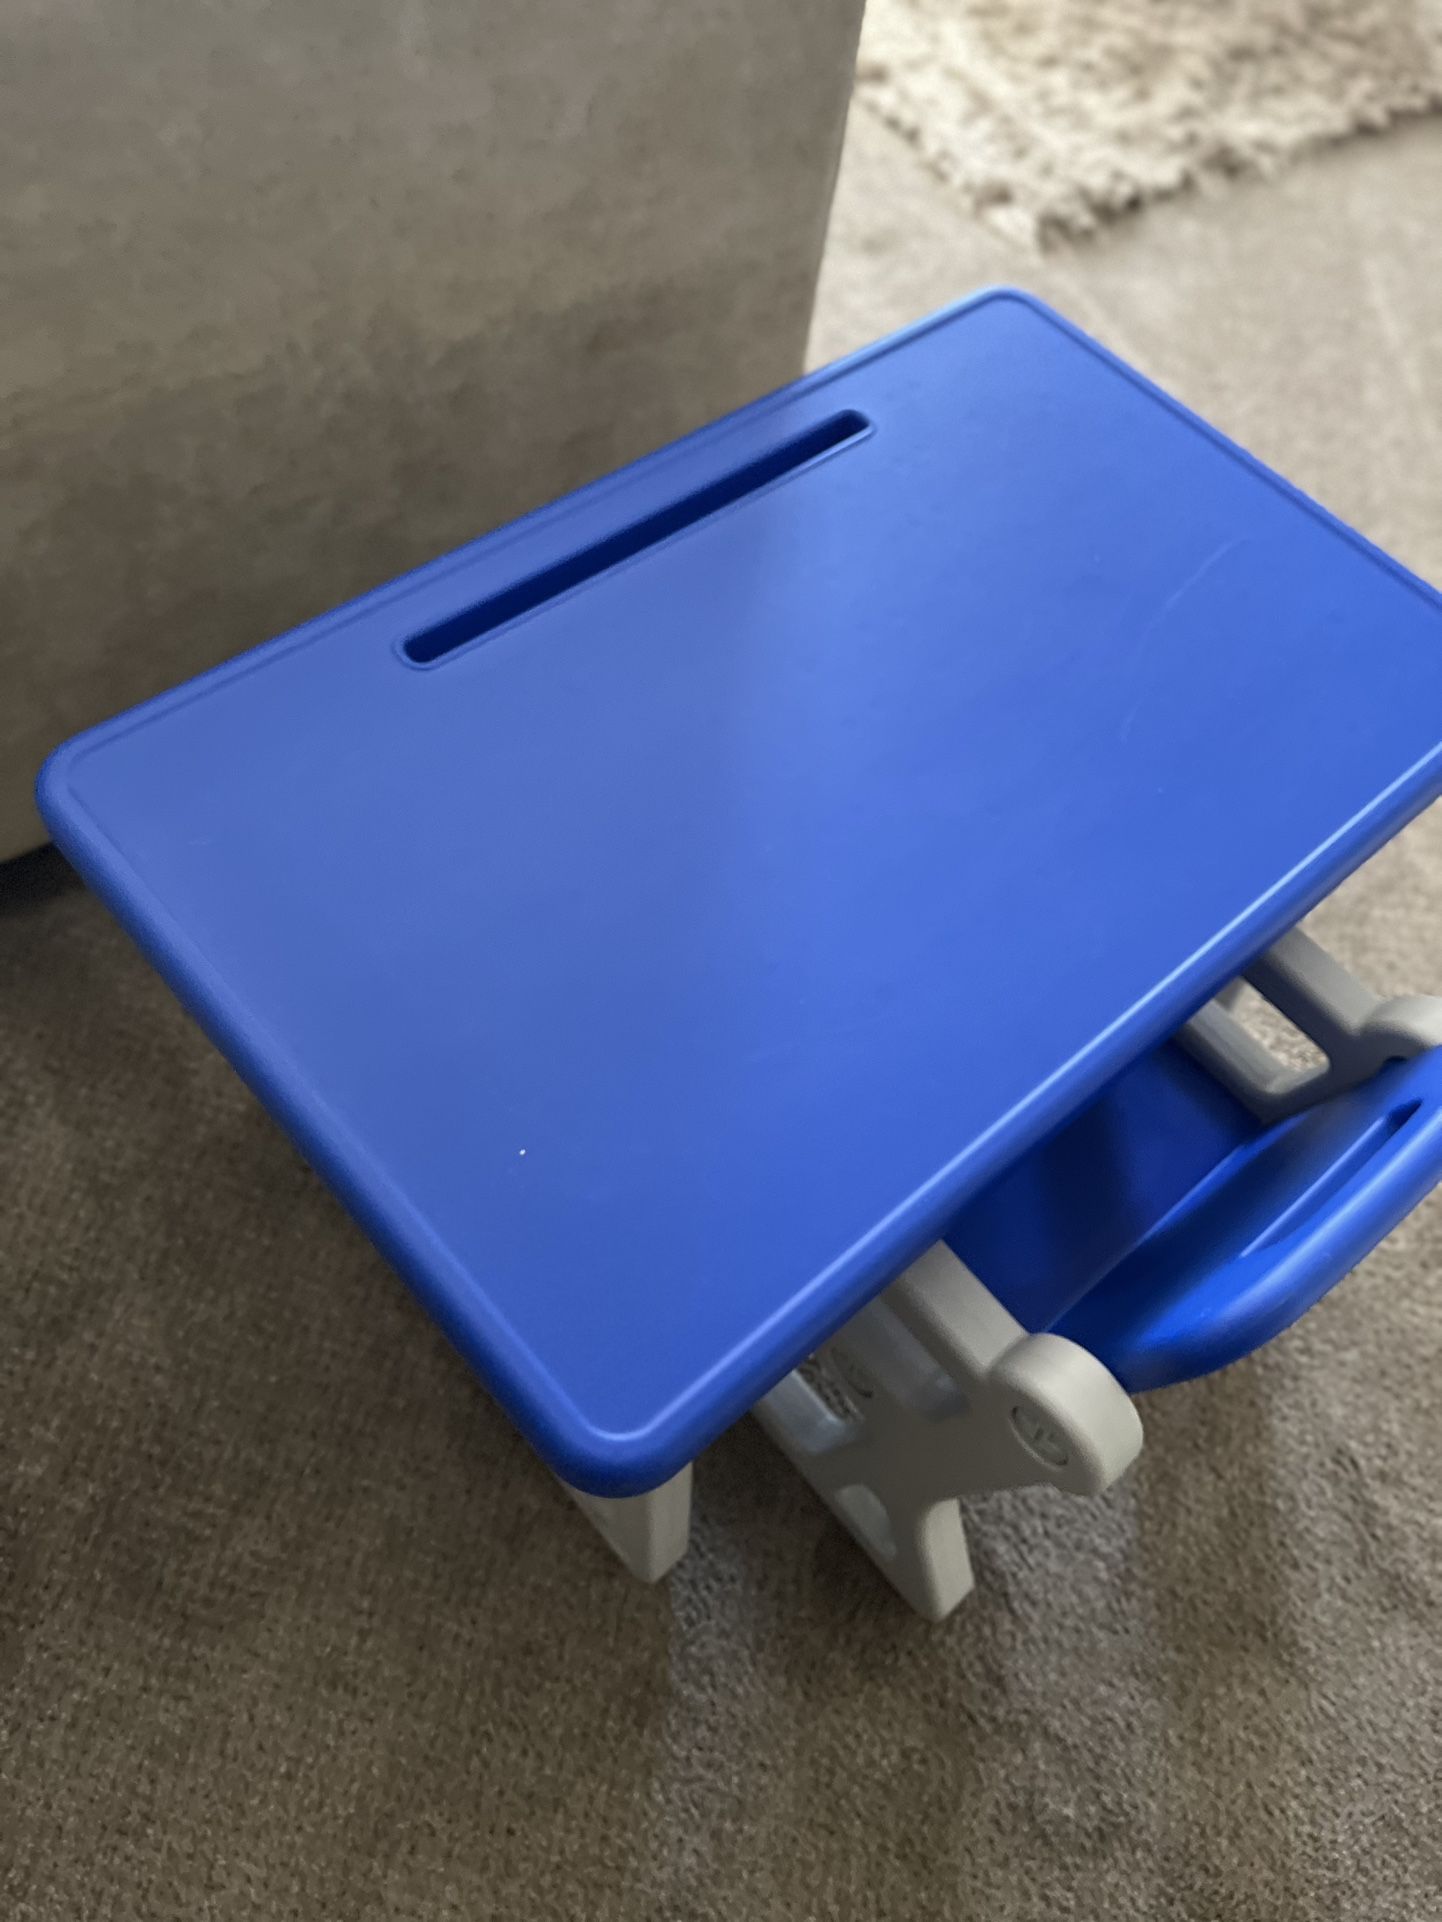 Toddler Table